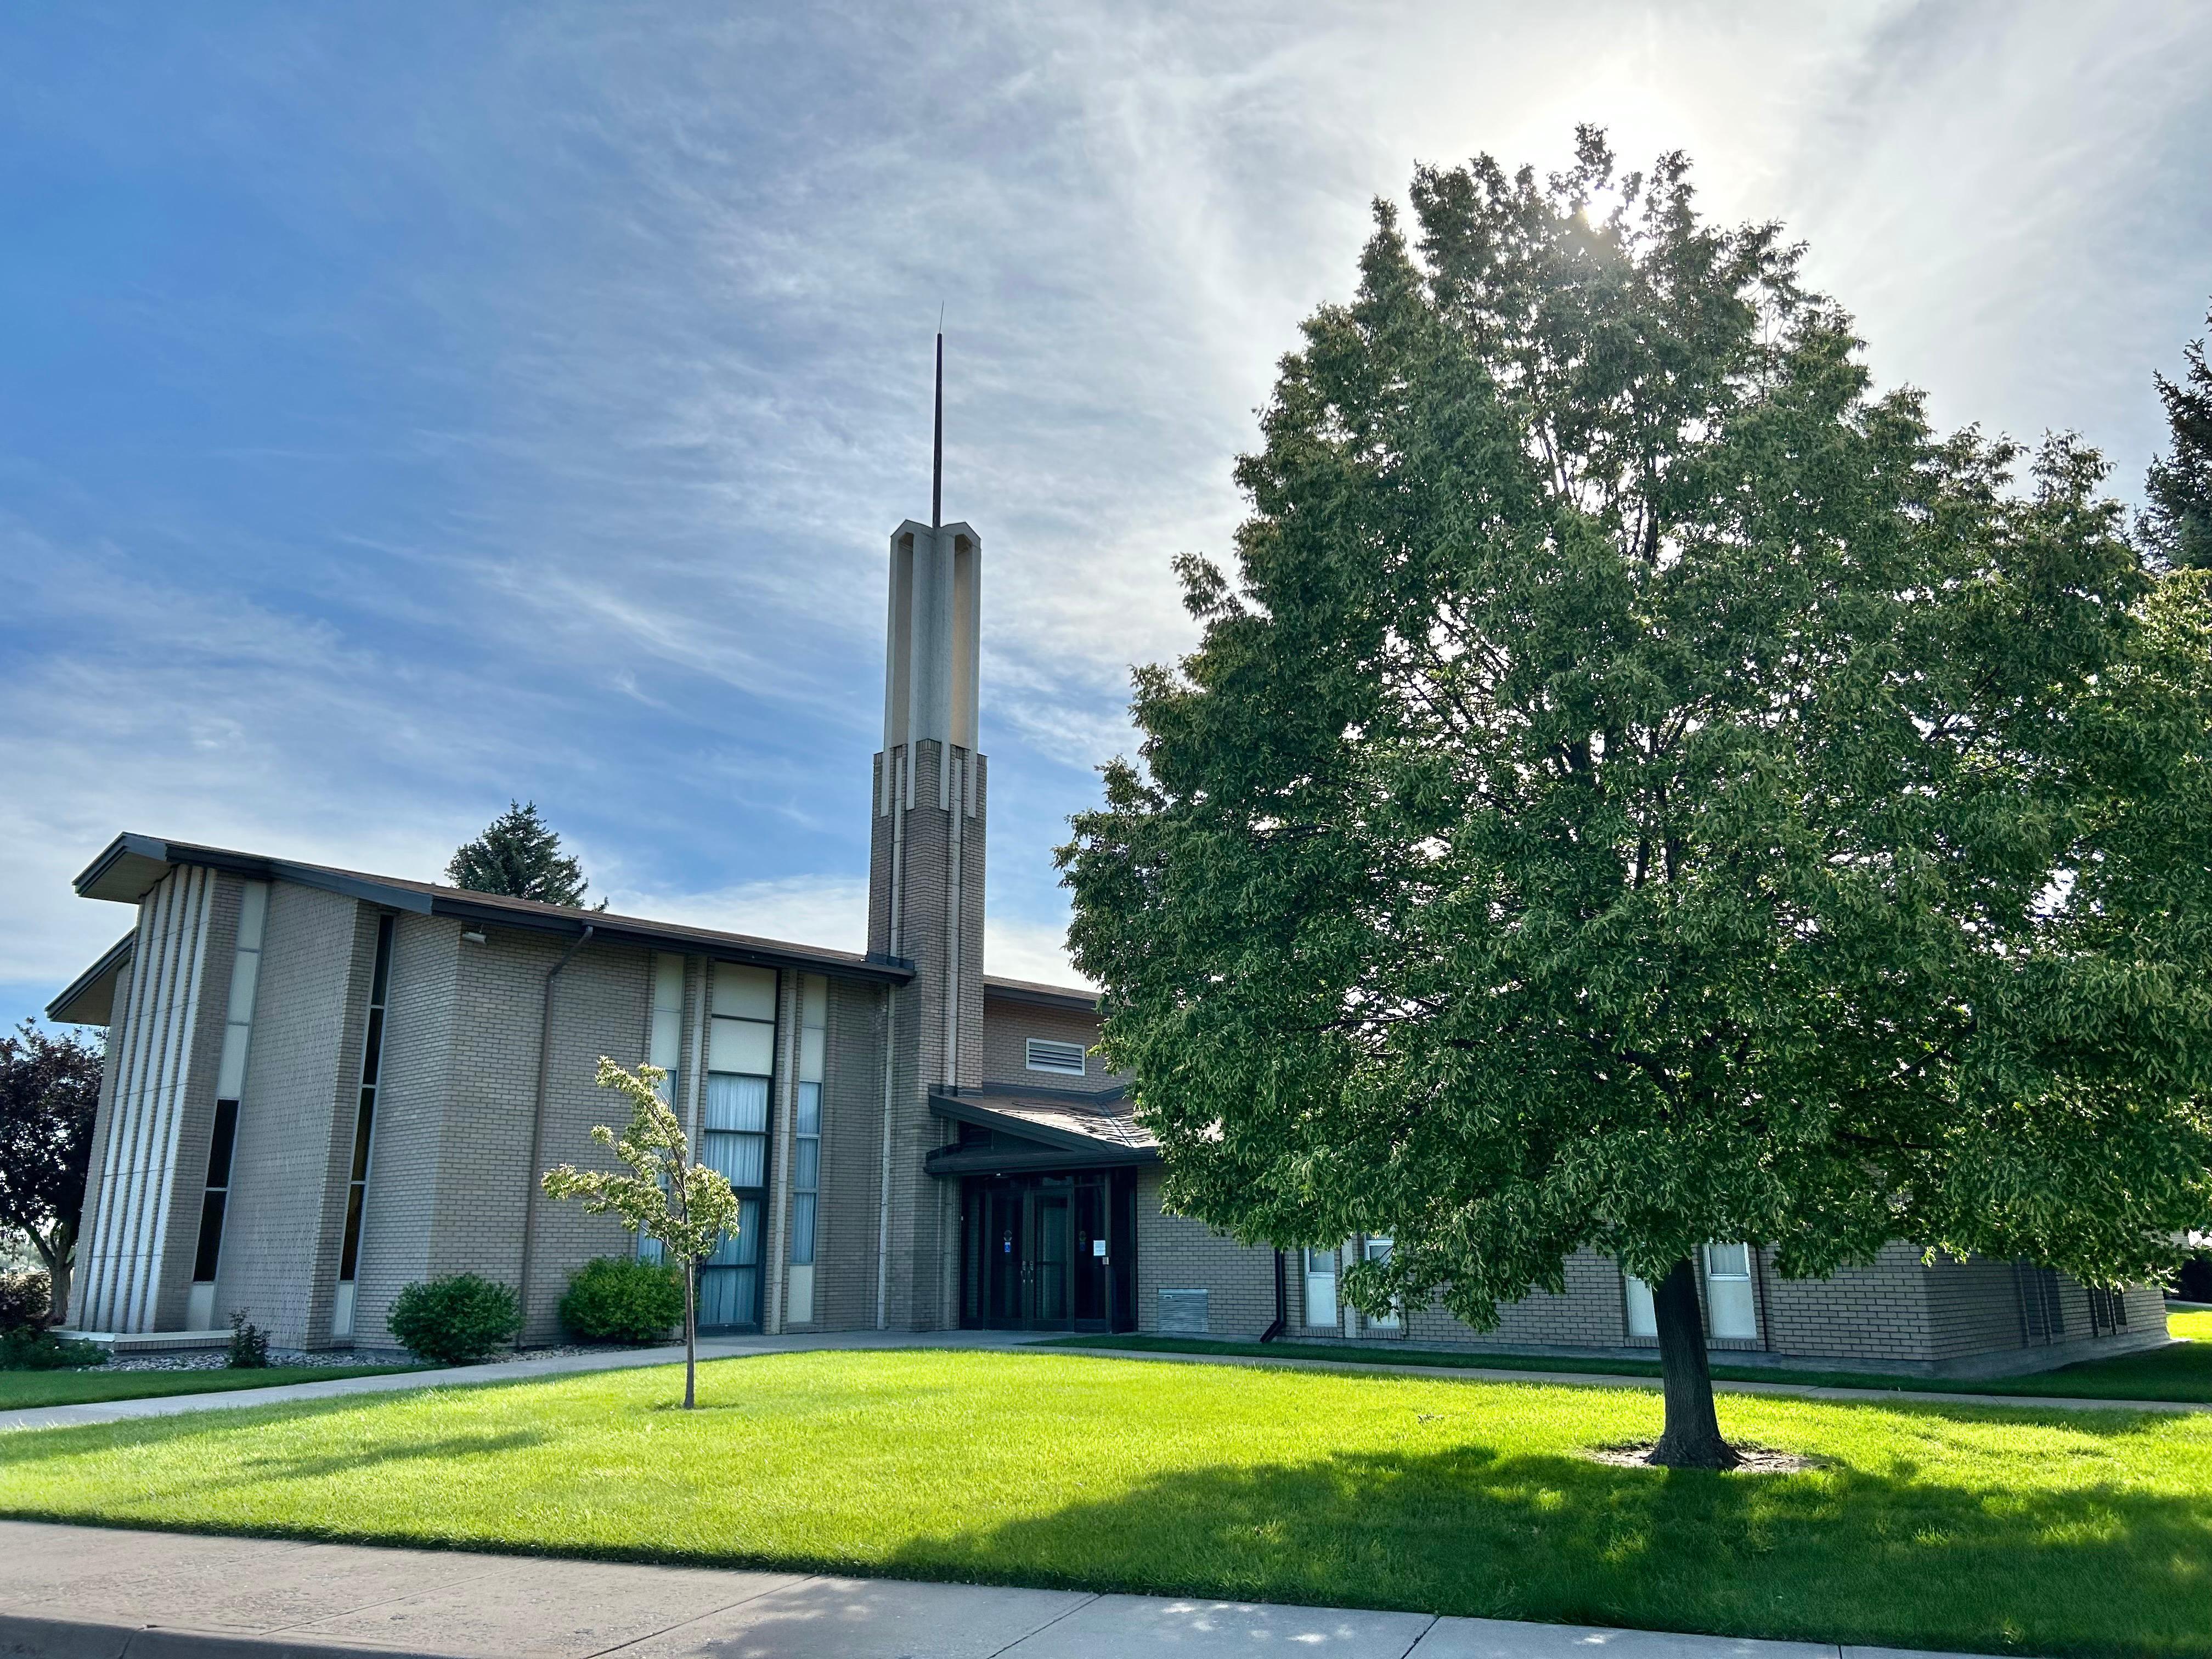 North Entrance of the Fort Hall Building of The Church of Jesus Christ of Latter-Day Saints located at 333 South Treaty Hwy (US 91)
in Pocatello, ID.